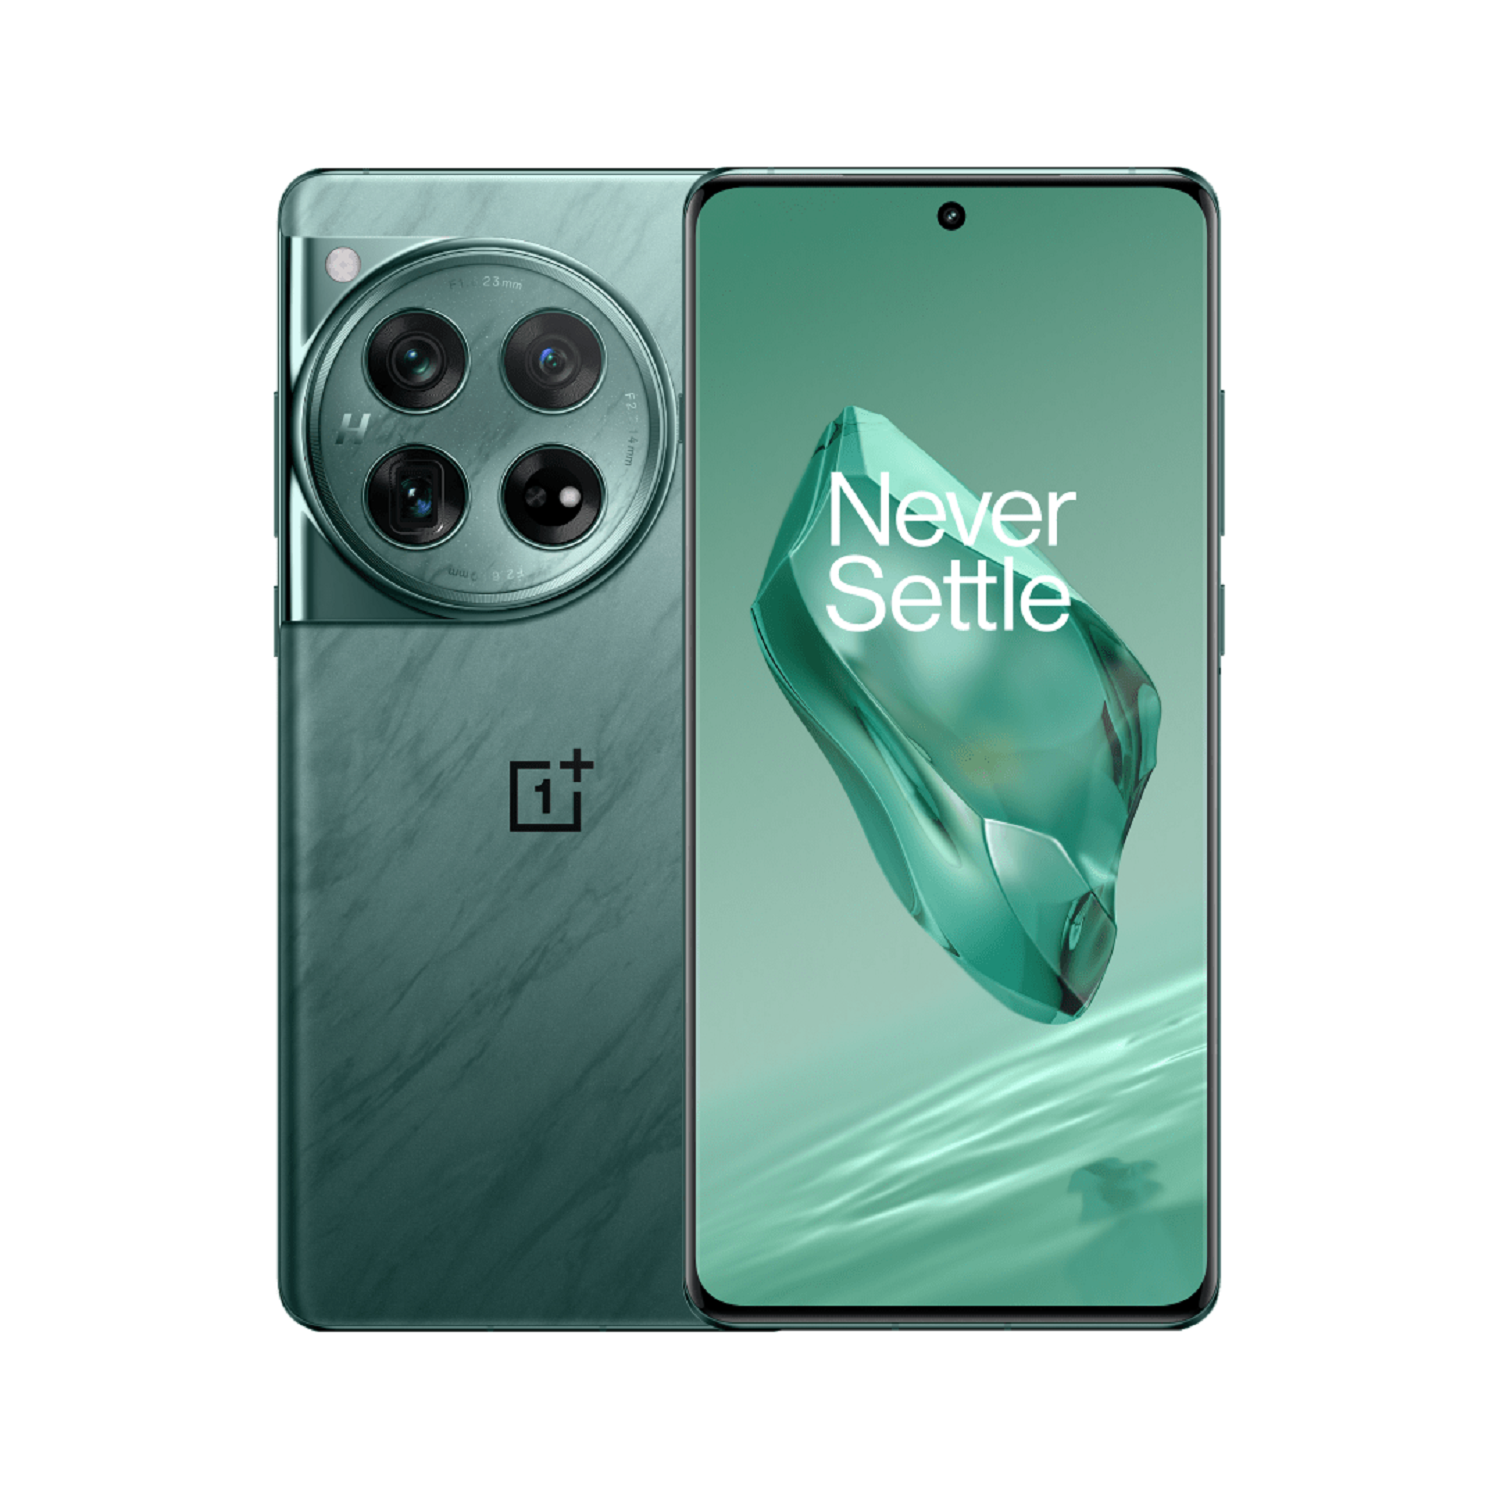 Photos - Other for Computer OnePlus 12 512GB Dual SIM 5G Mobile Phone - Flowy Emerald 5011105288 